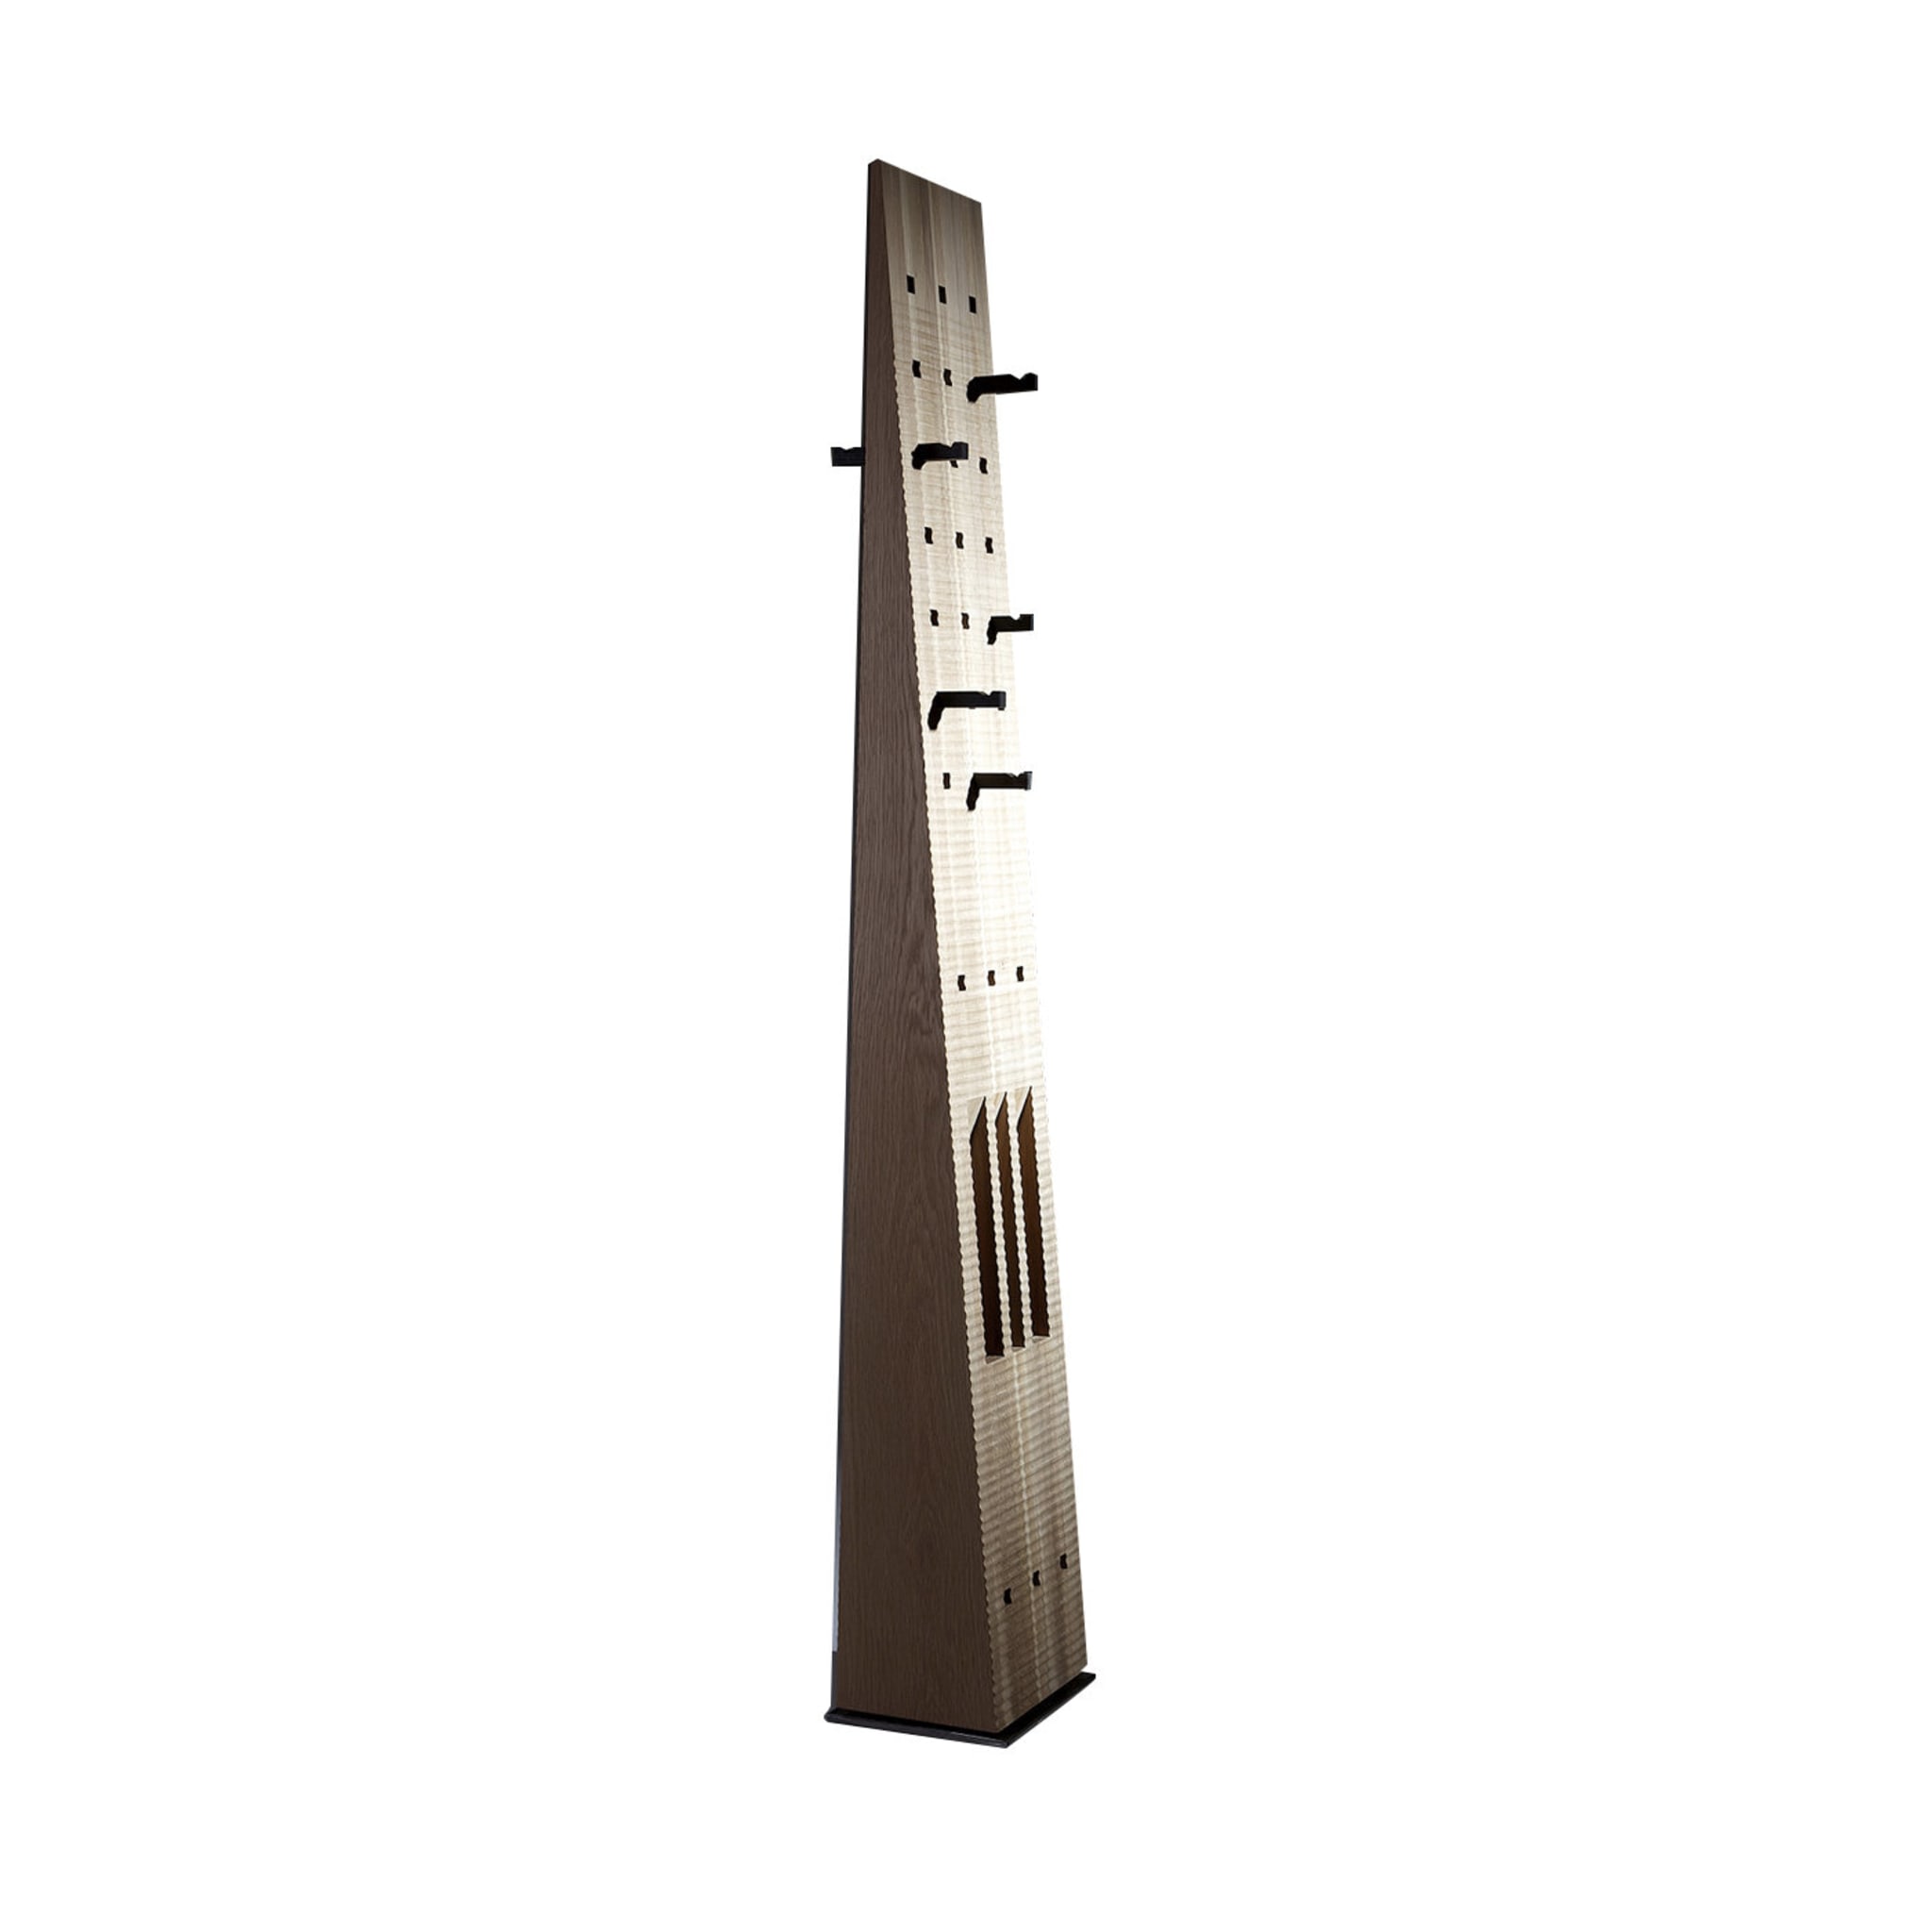 Scheggia Coat hanger by Mauro Dell'Orco - Main view